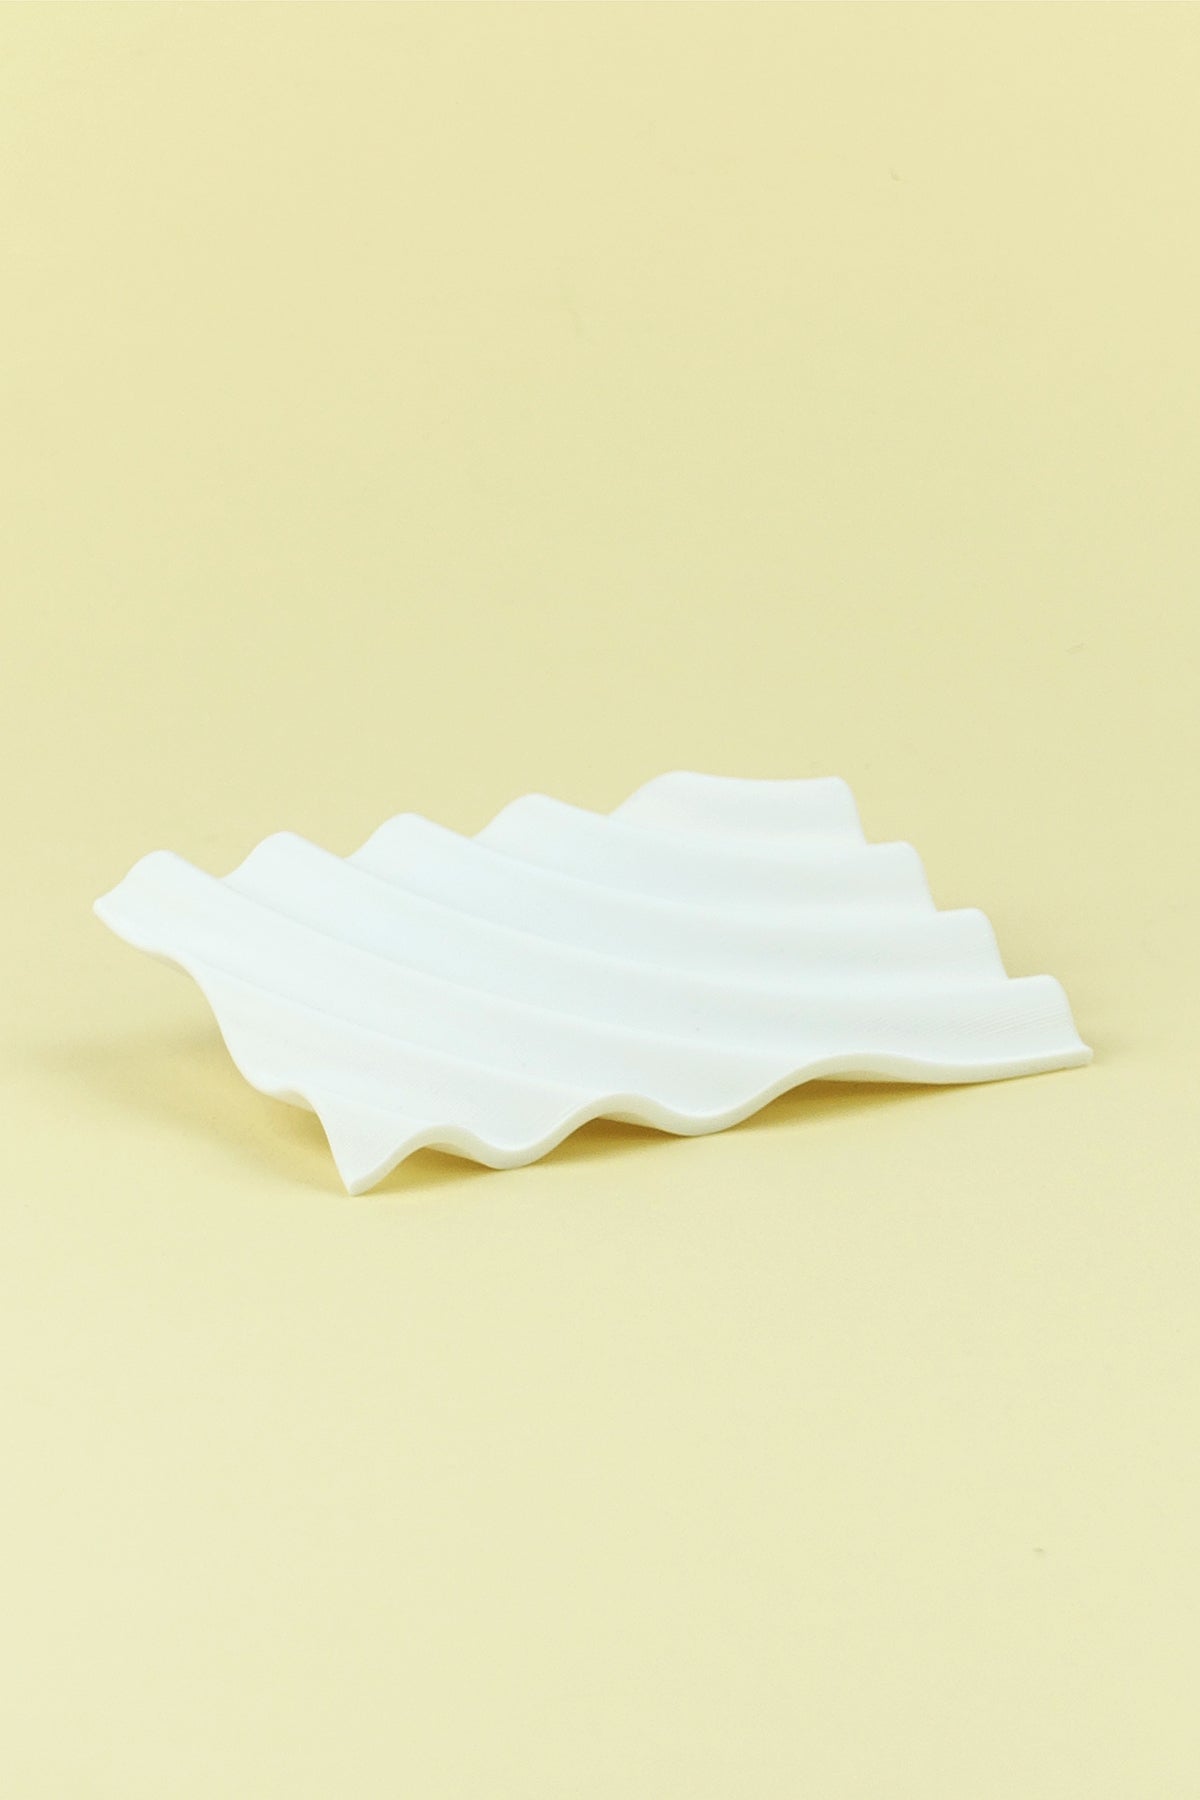 Seifenschale aus recyceltem PET / recycled PET soap dish pearl white ripple